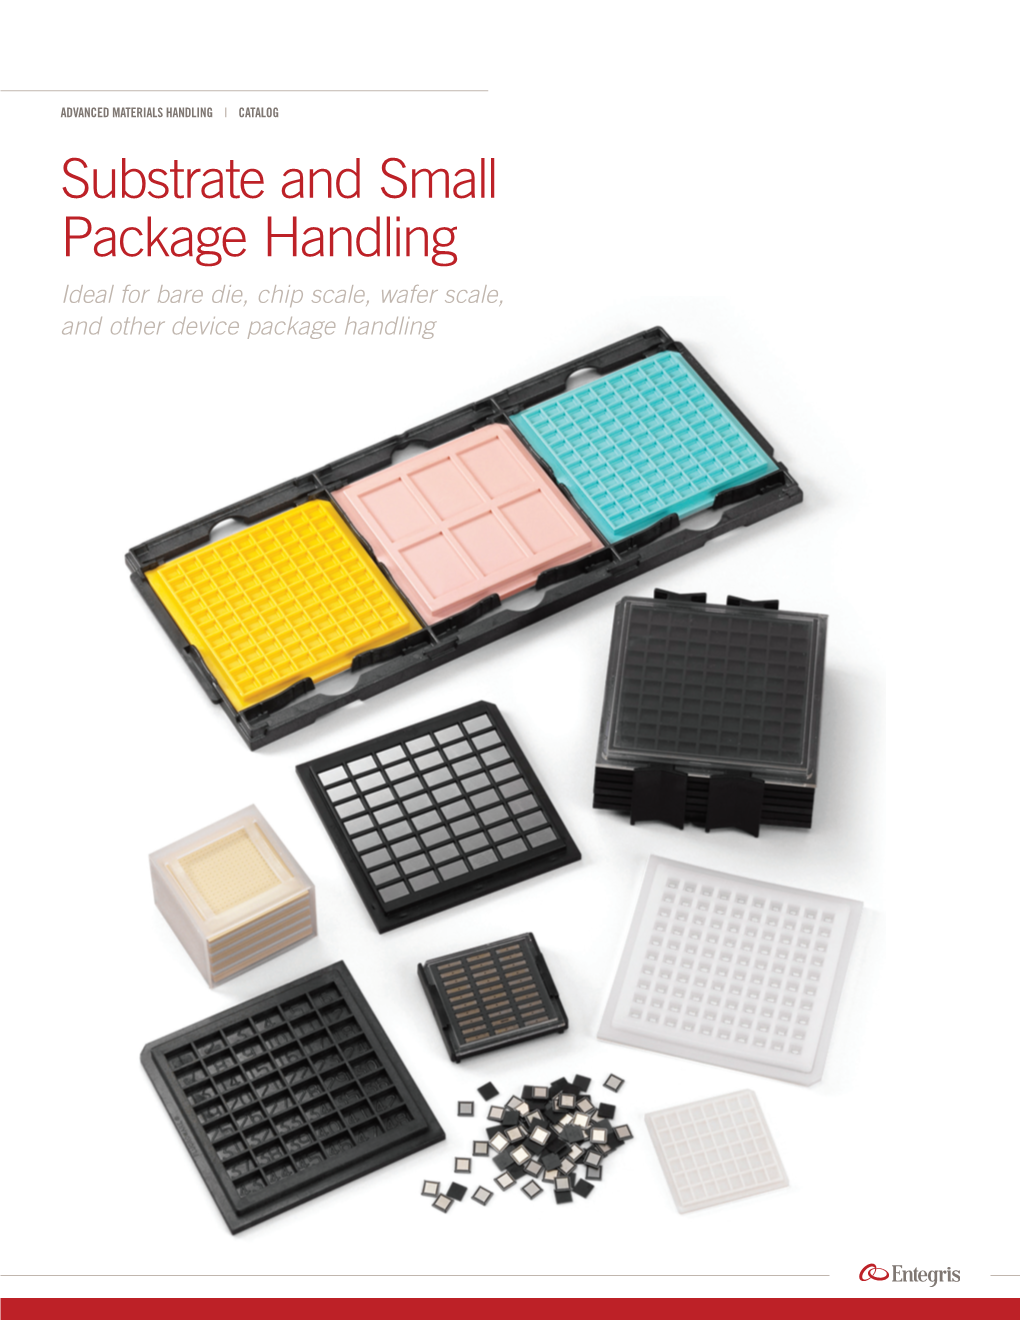 Substrate and Small Package Handling Ideal for Bare Die, Chip Scale, Wafer Scale, and Other Device Package Handling SUBSTRATE and SMALL PACKAGE HANDLING